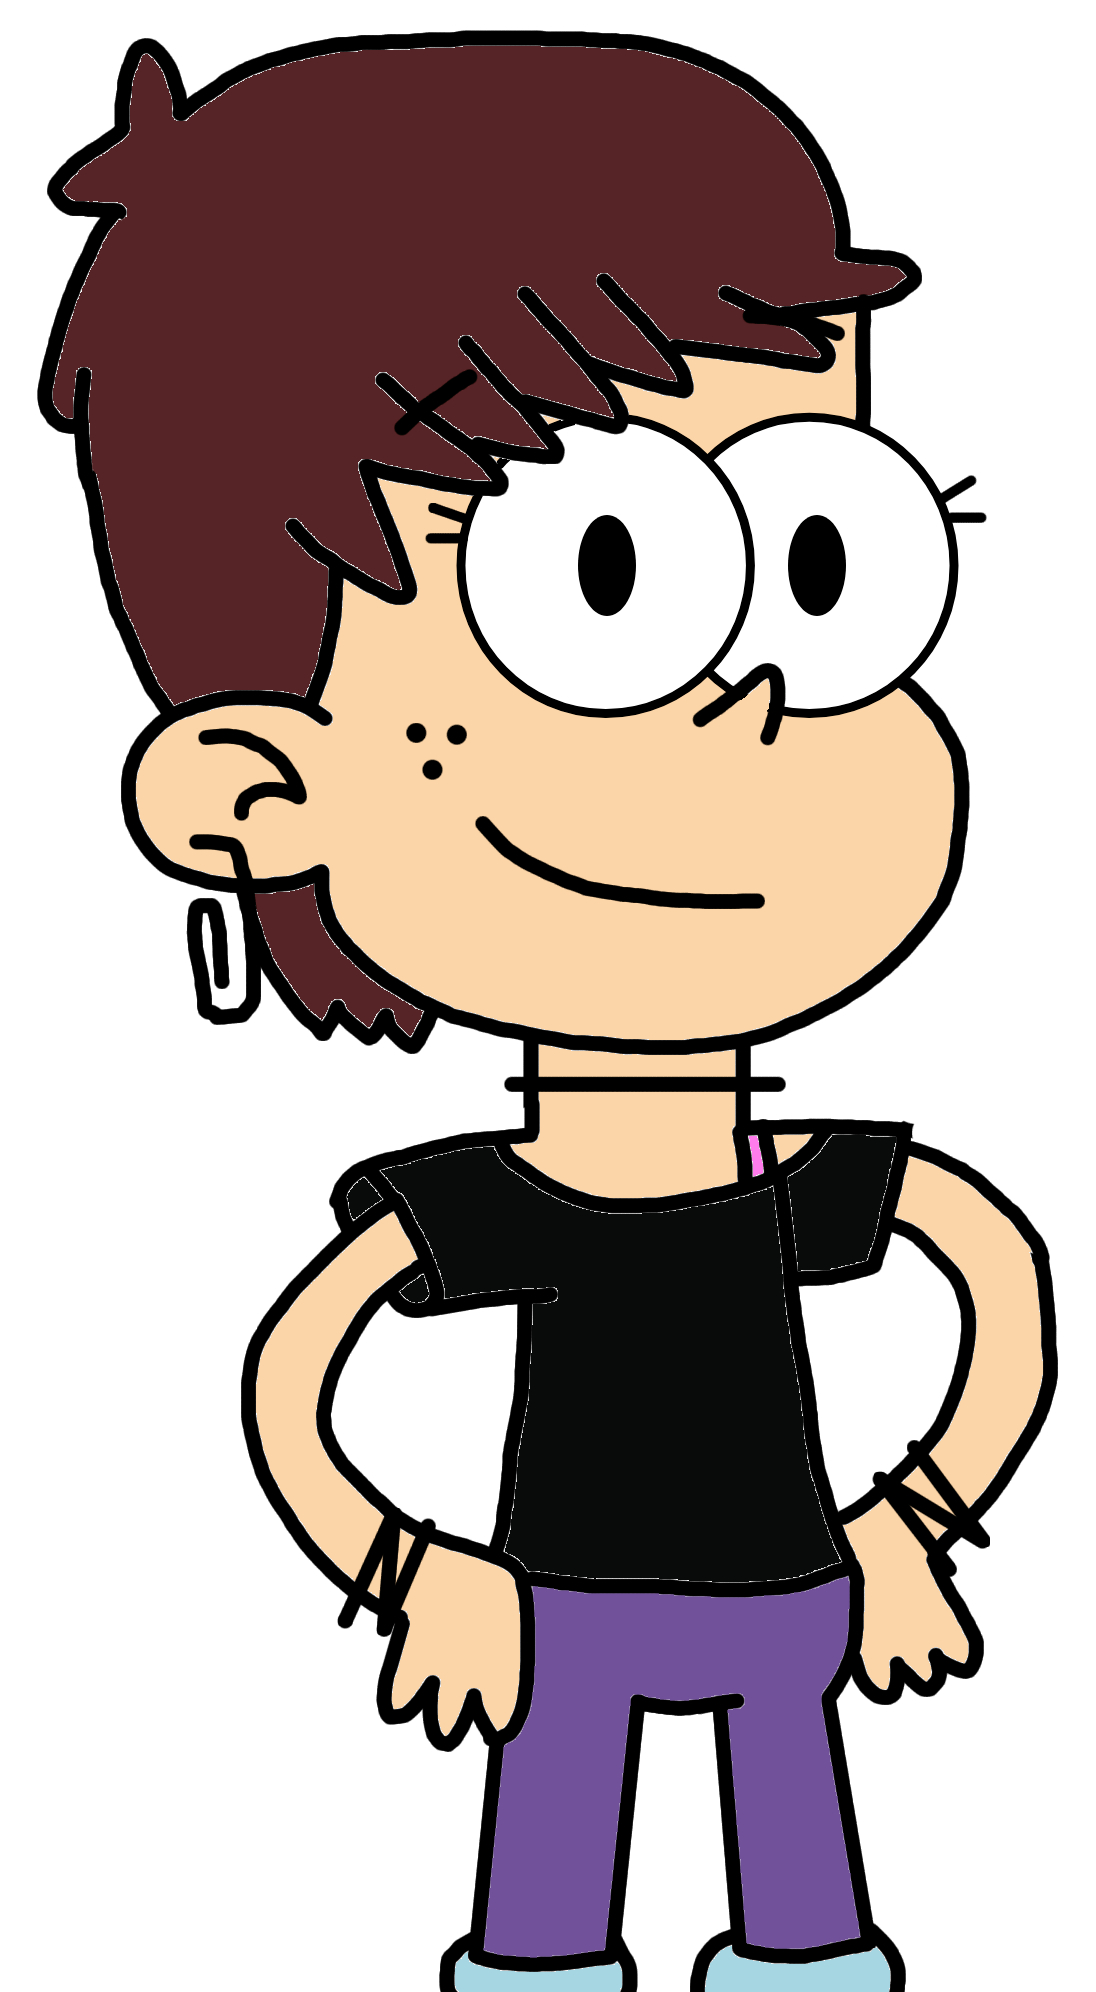 Luna Loud with 1980s Outfit by NicholasVinhChauLe on DeviantArt